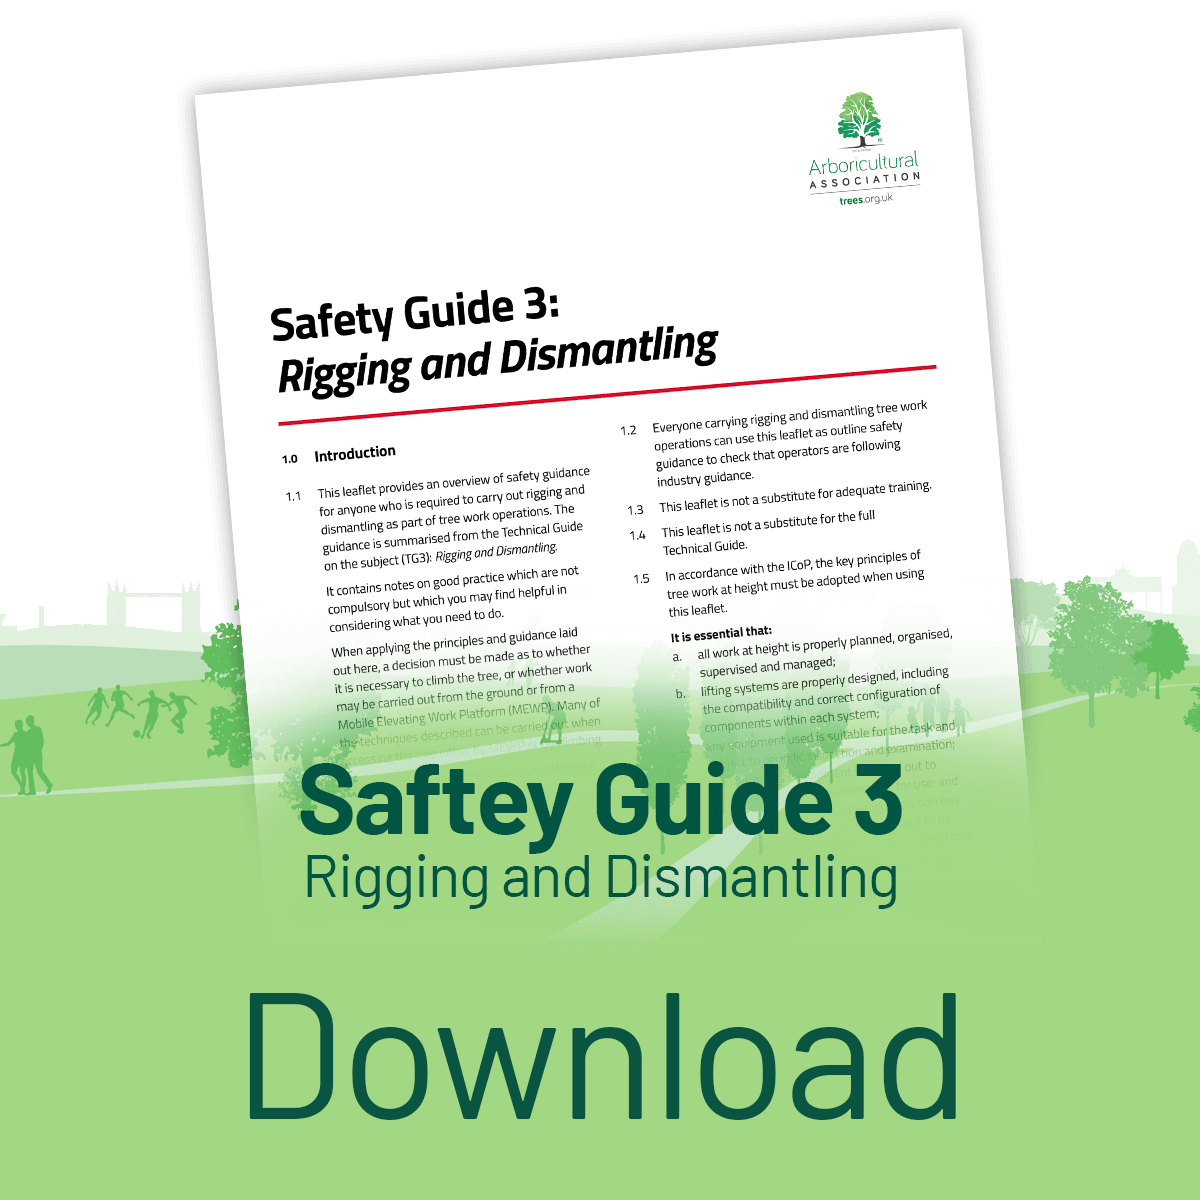 Download the Safety Guide 3